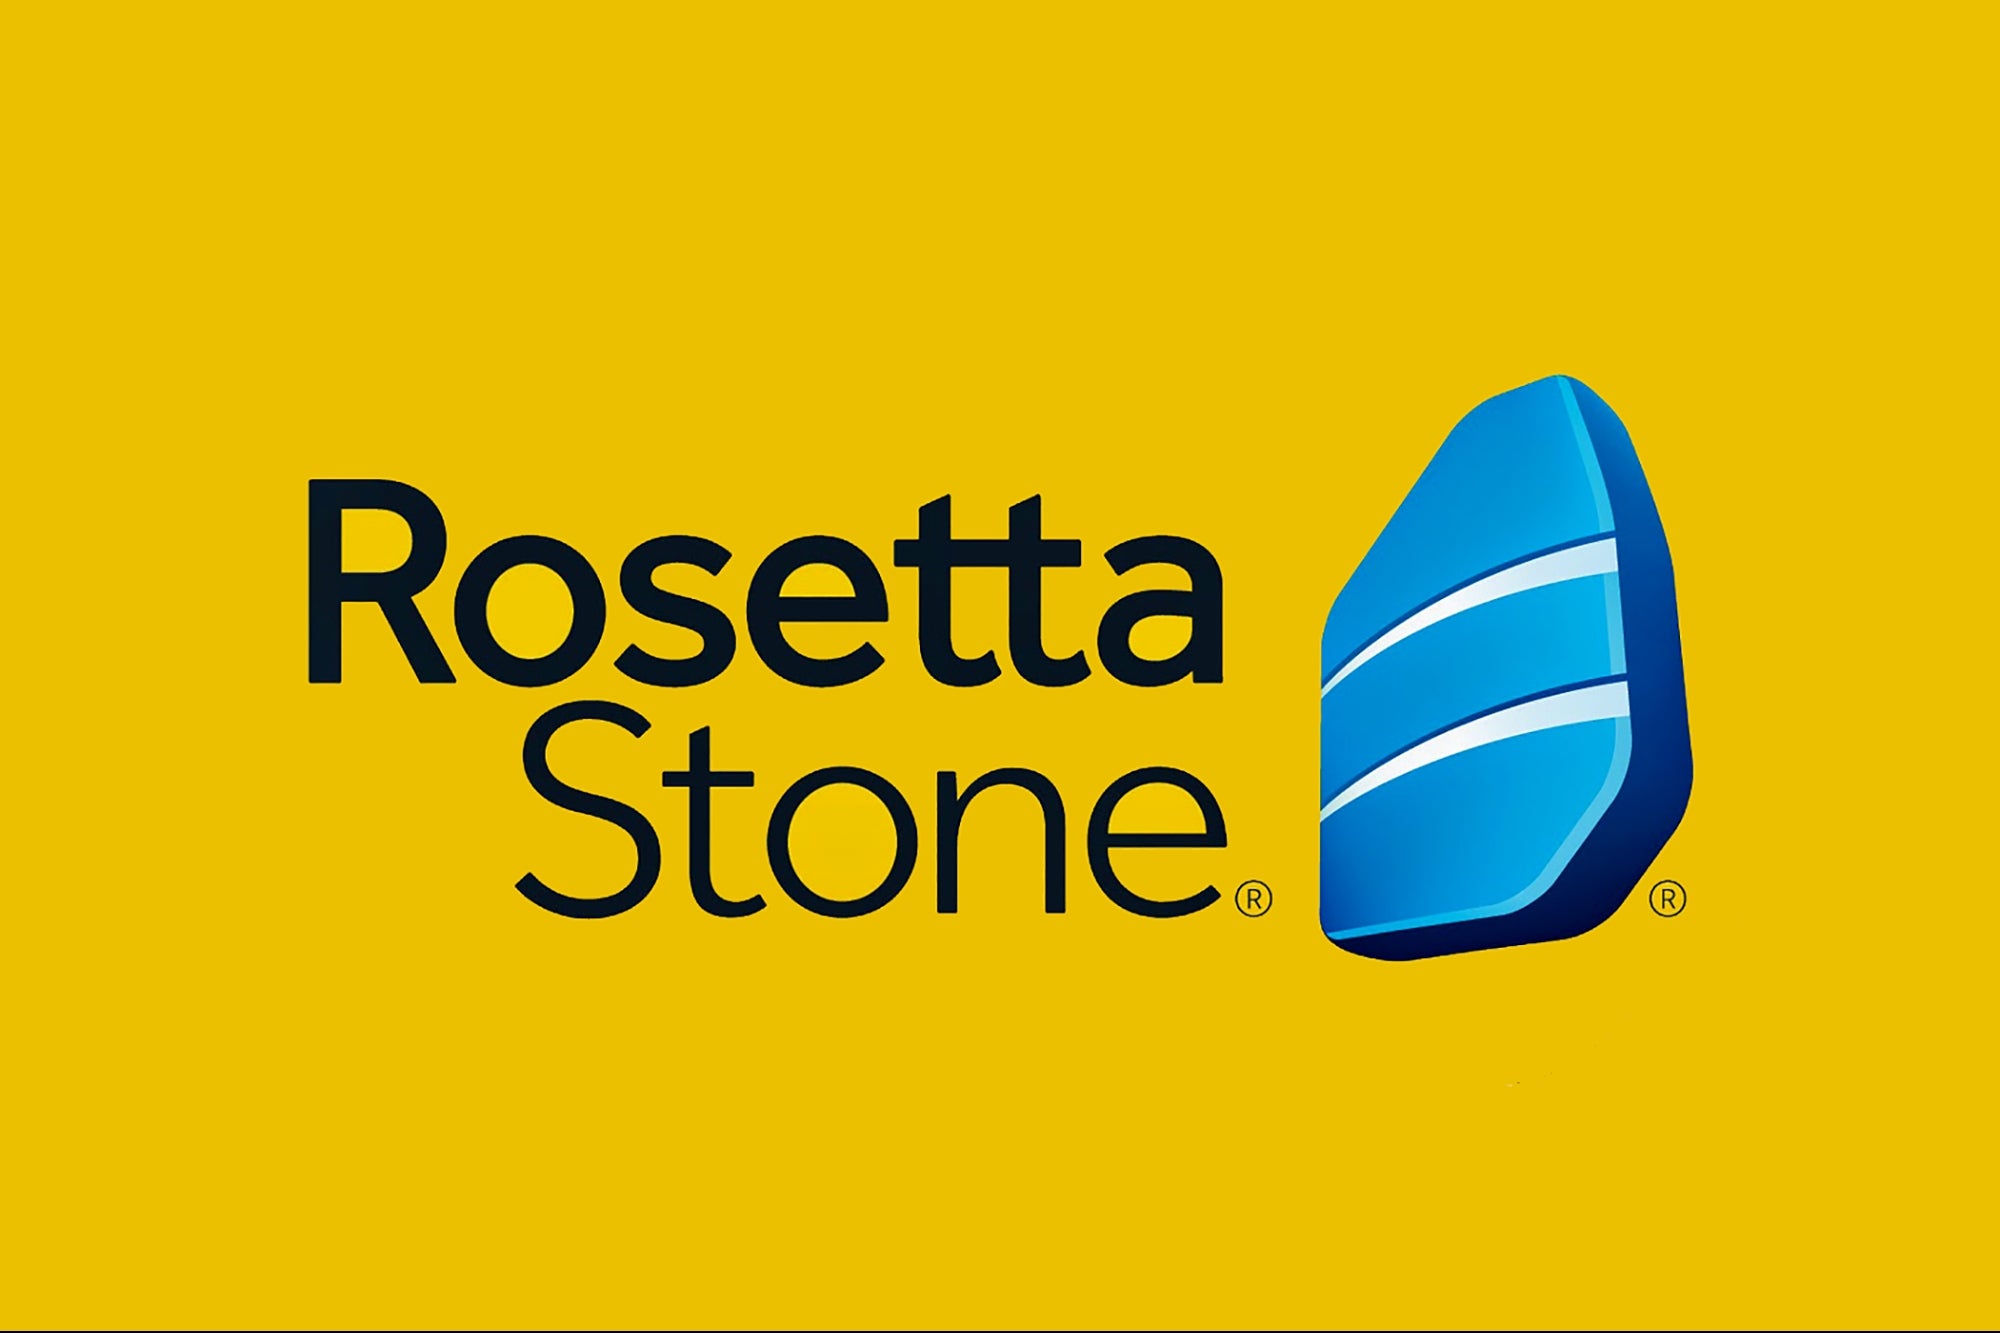 unlock-your-language-learning-potential-with-rosetta-stone